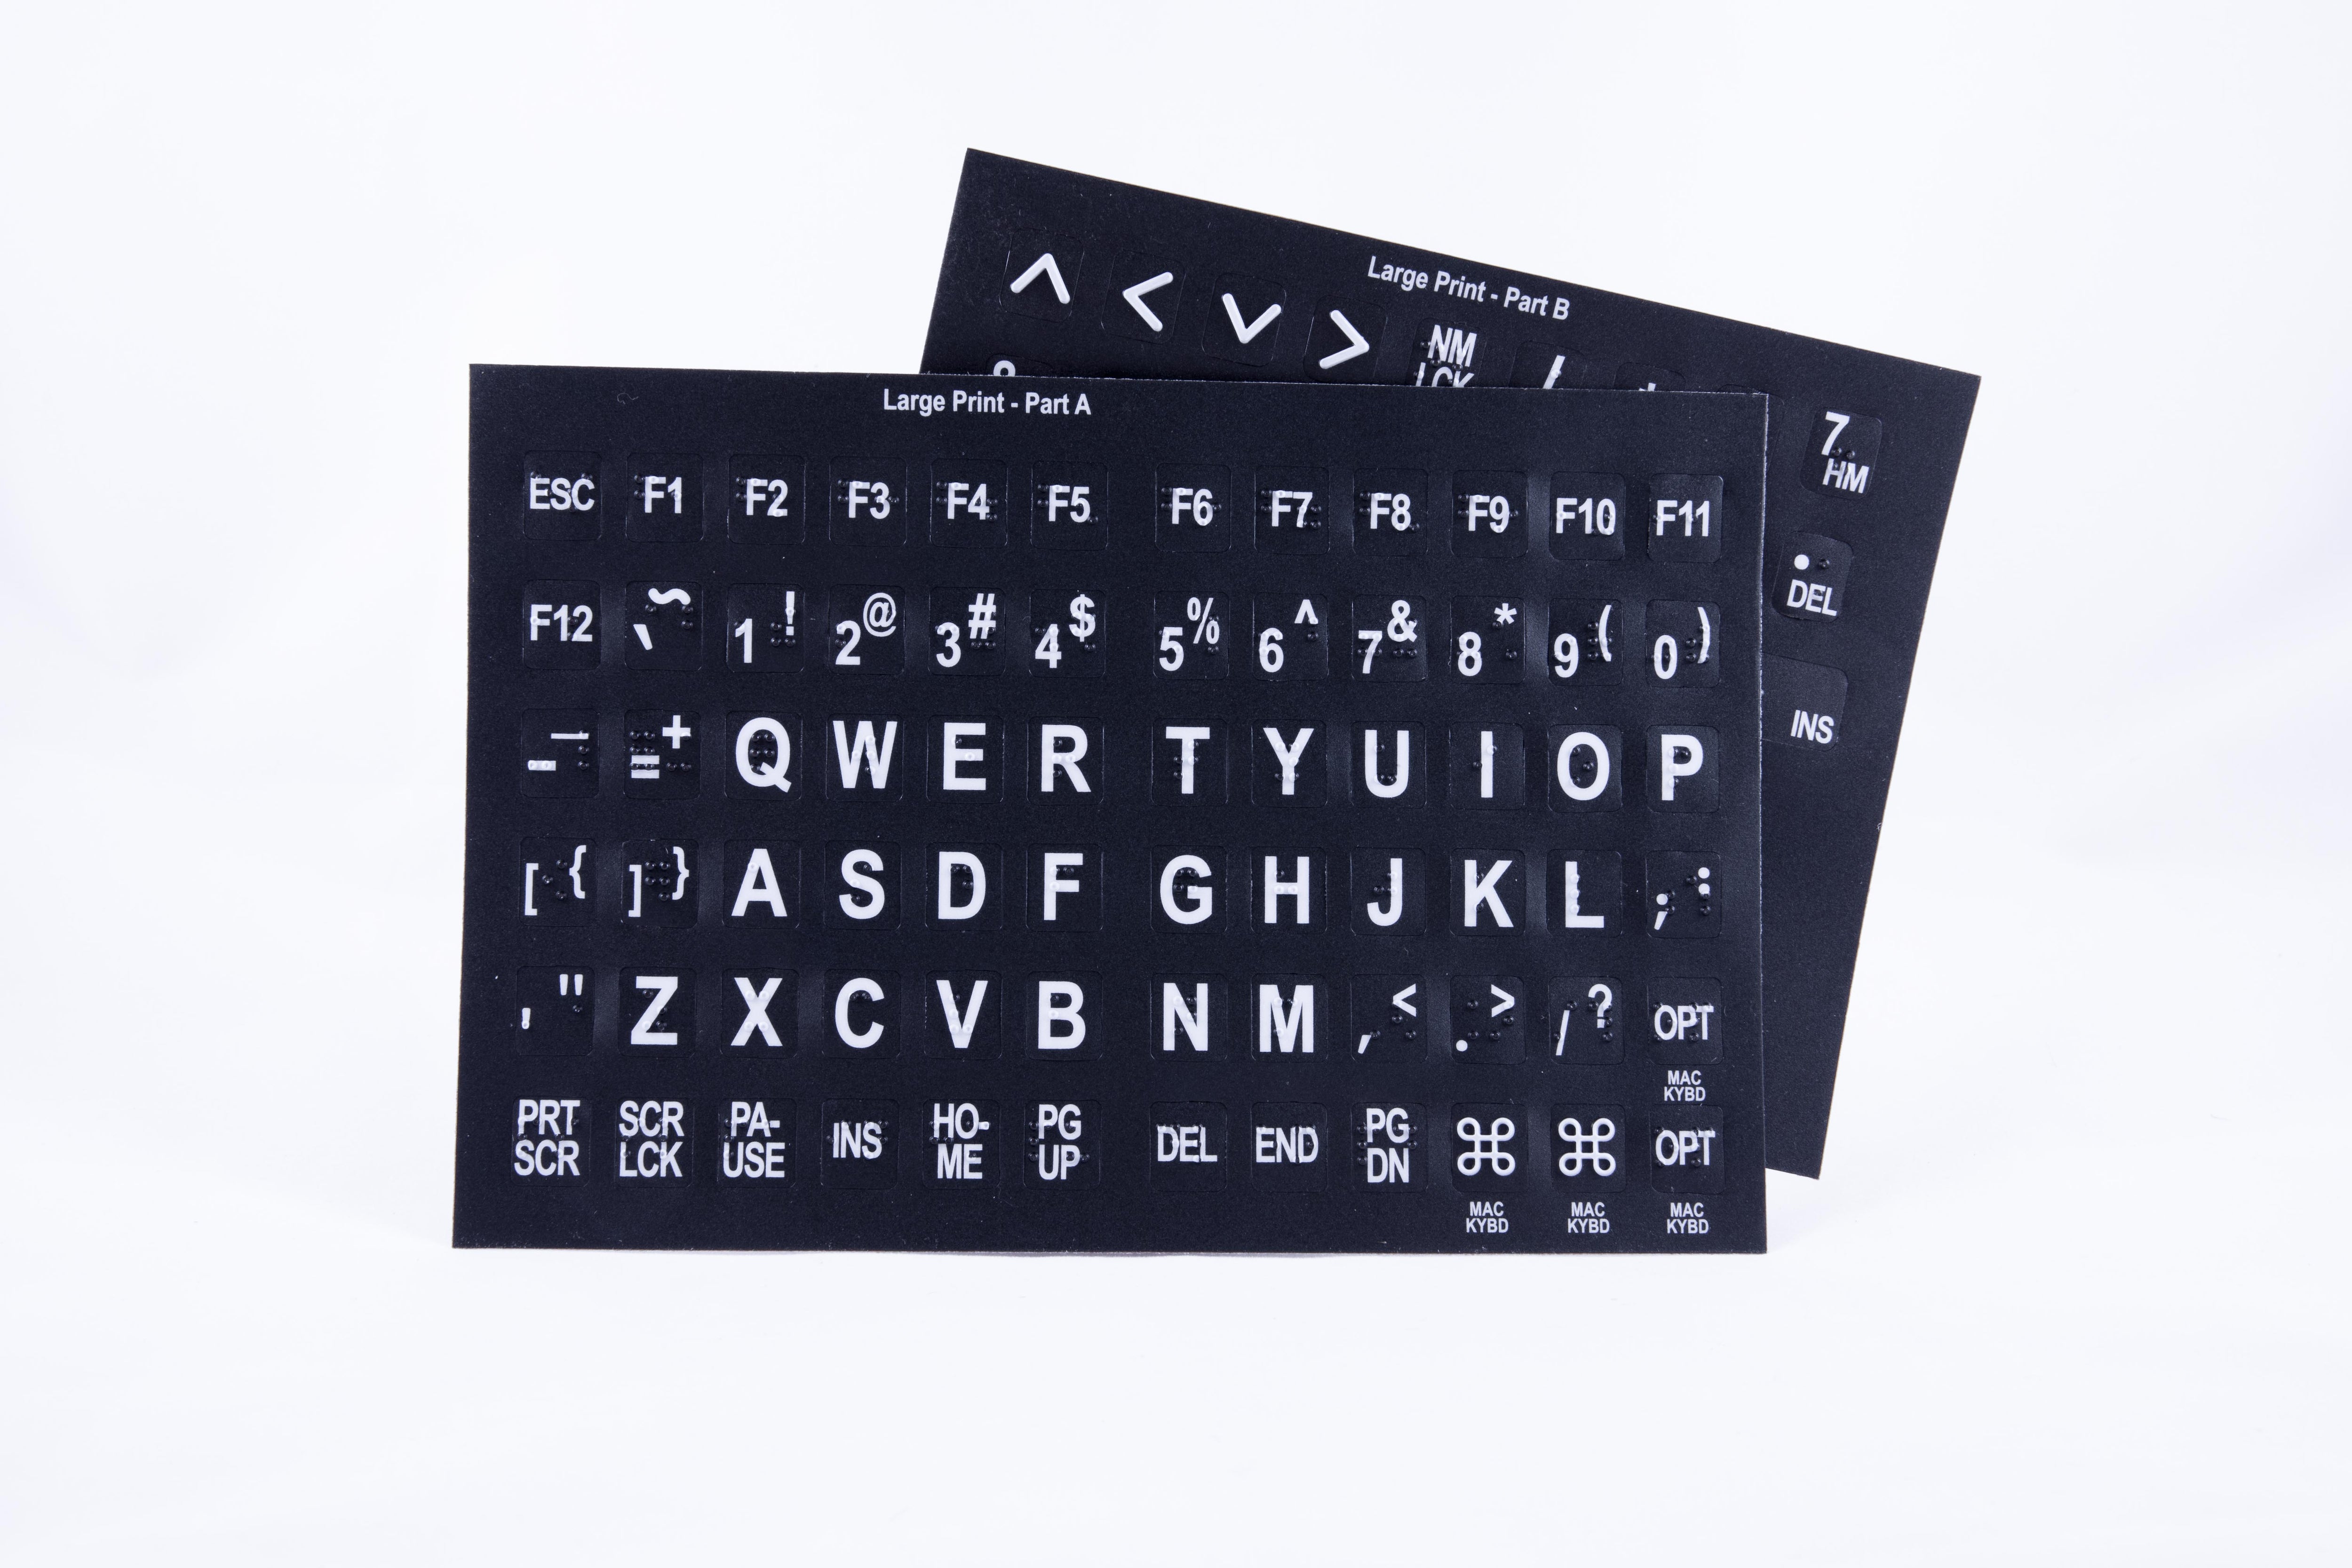 Braille Keyboard Stickers for the Blind and Visually Impaired